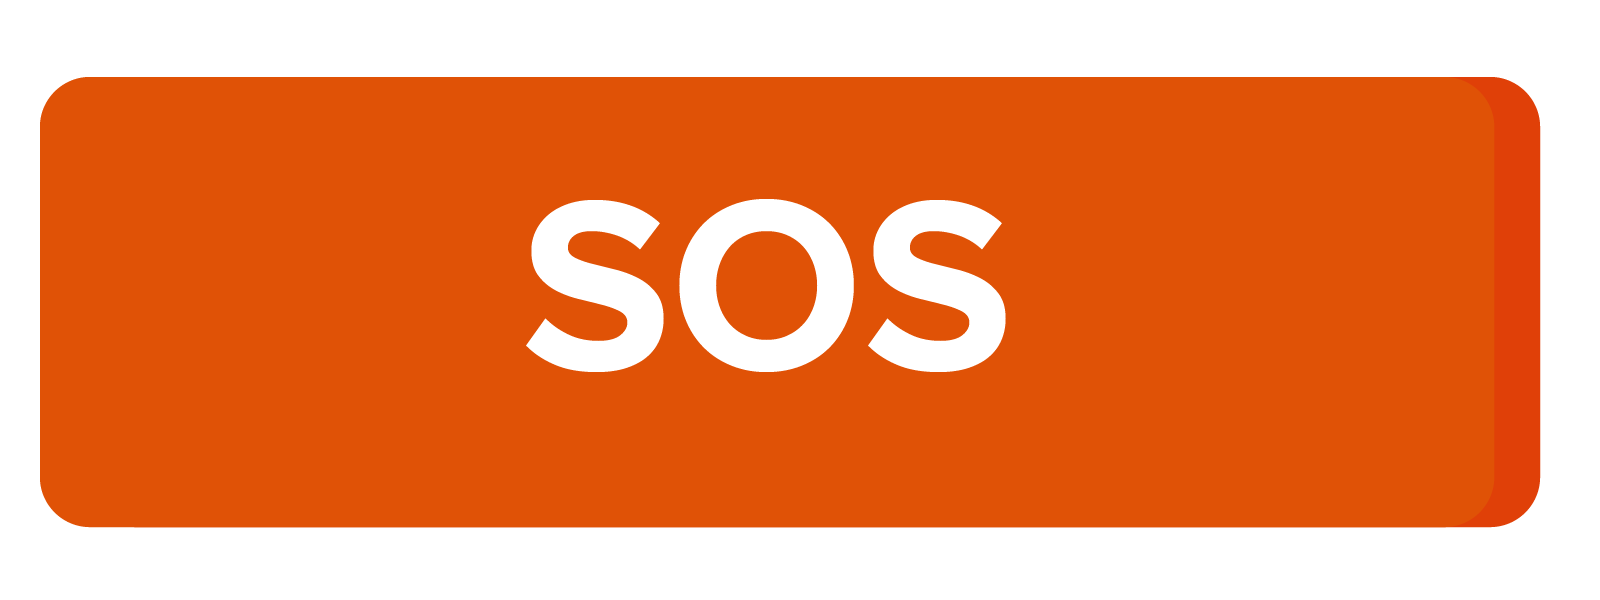 Image showing the letters SOS to indicate an emergency.